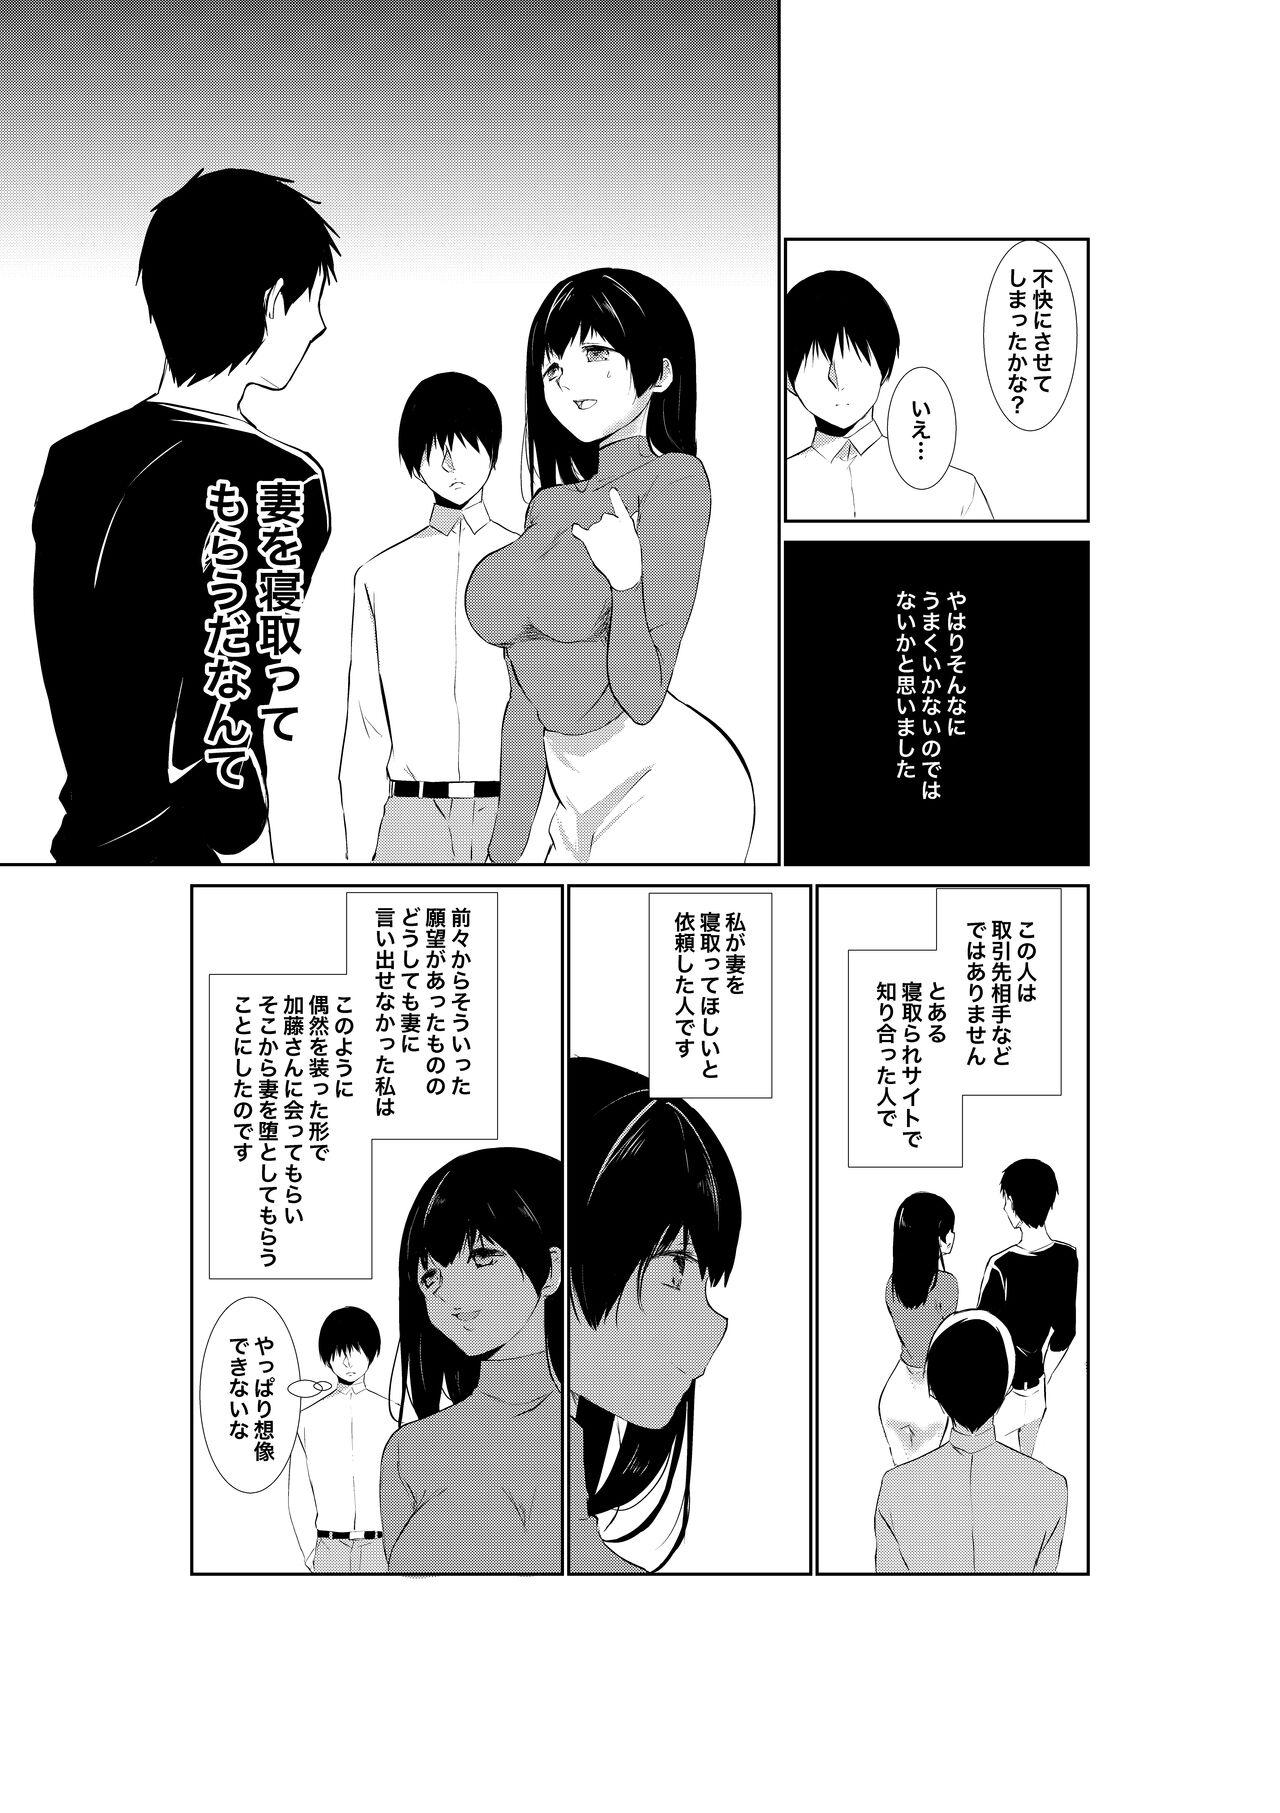 Married 妻が他人に堕ちるまで - Original Taboo - Page 7